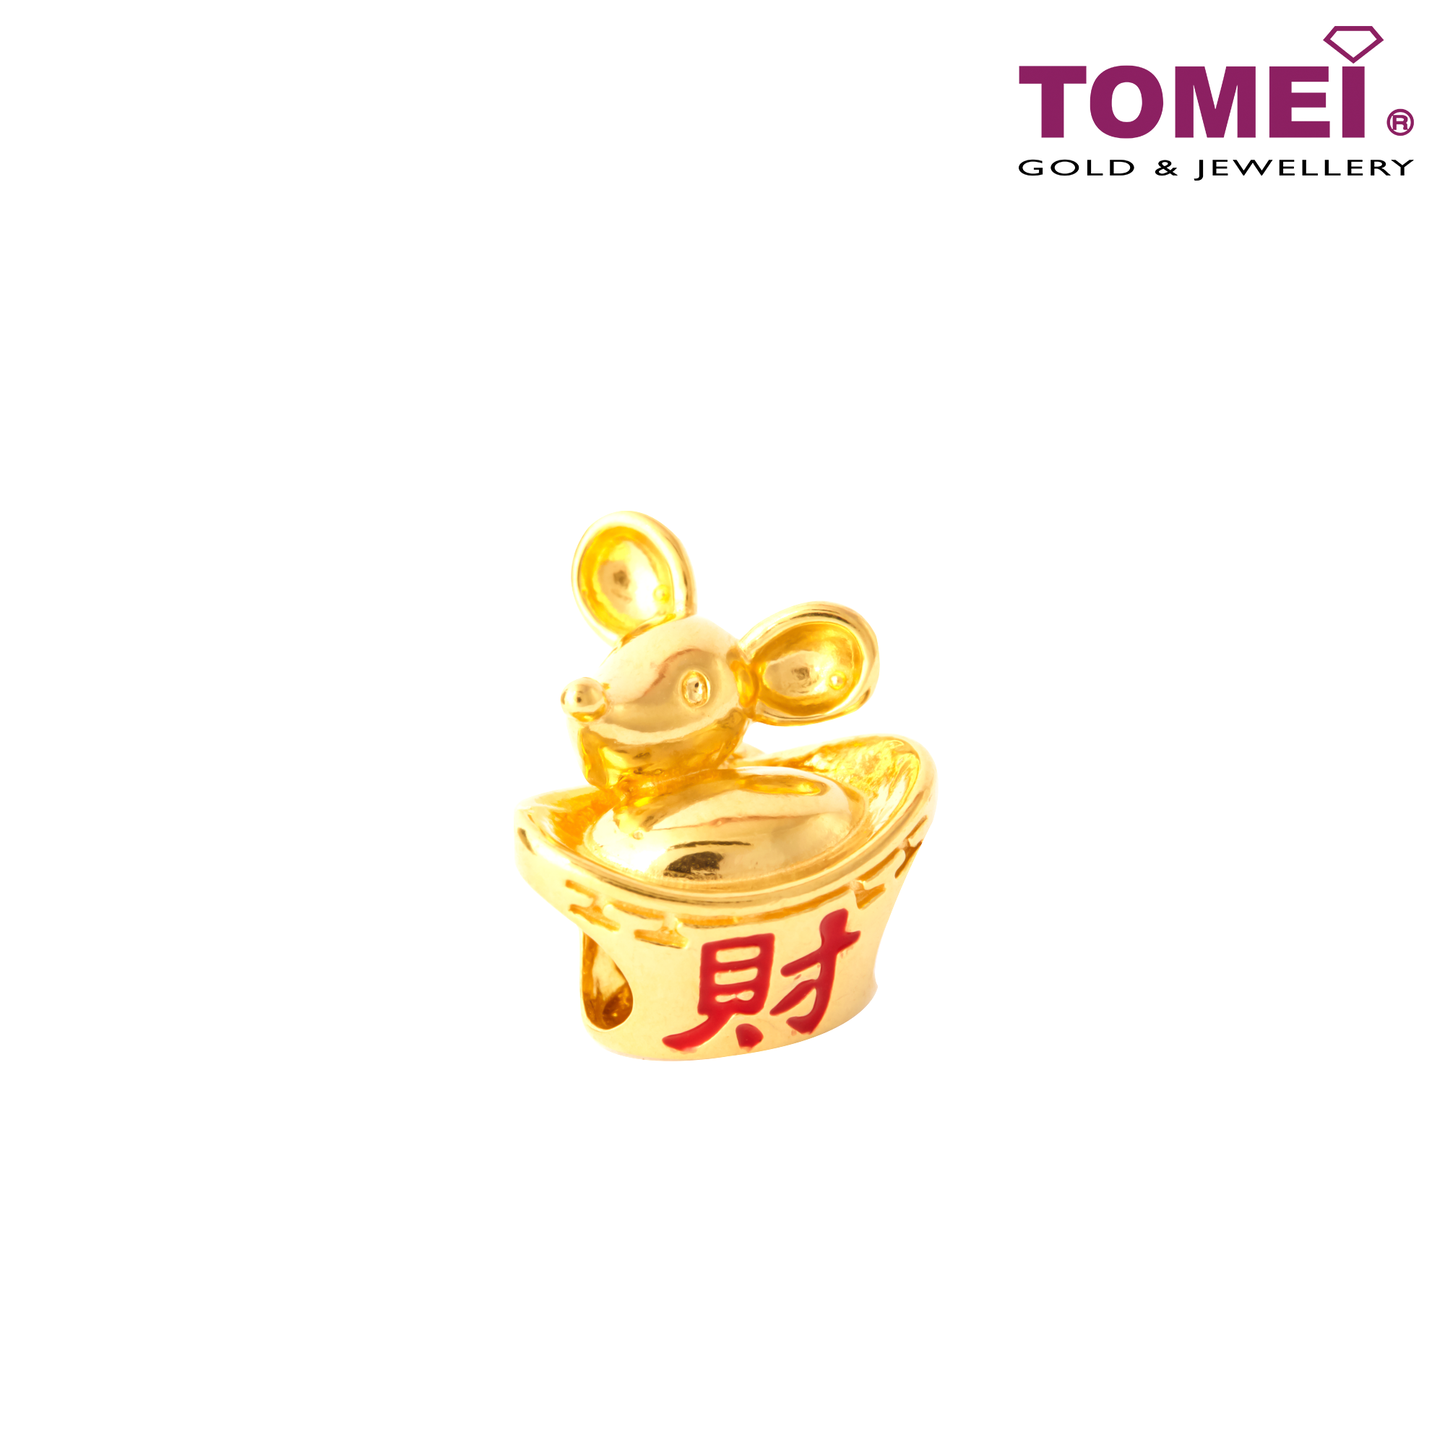 TOMEI Prosperity Sailing of Wealth Rat Charm, Yellow Gold 916